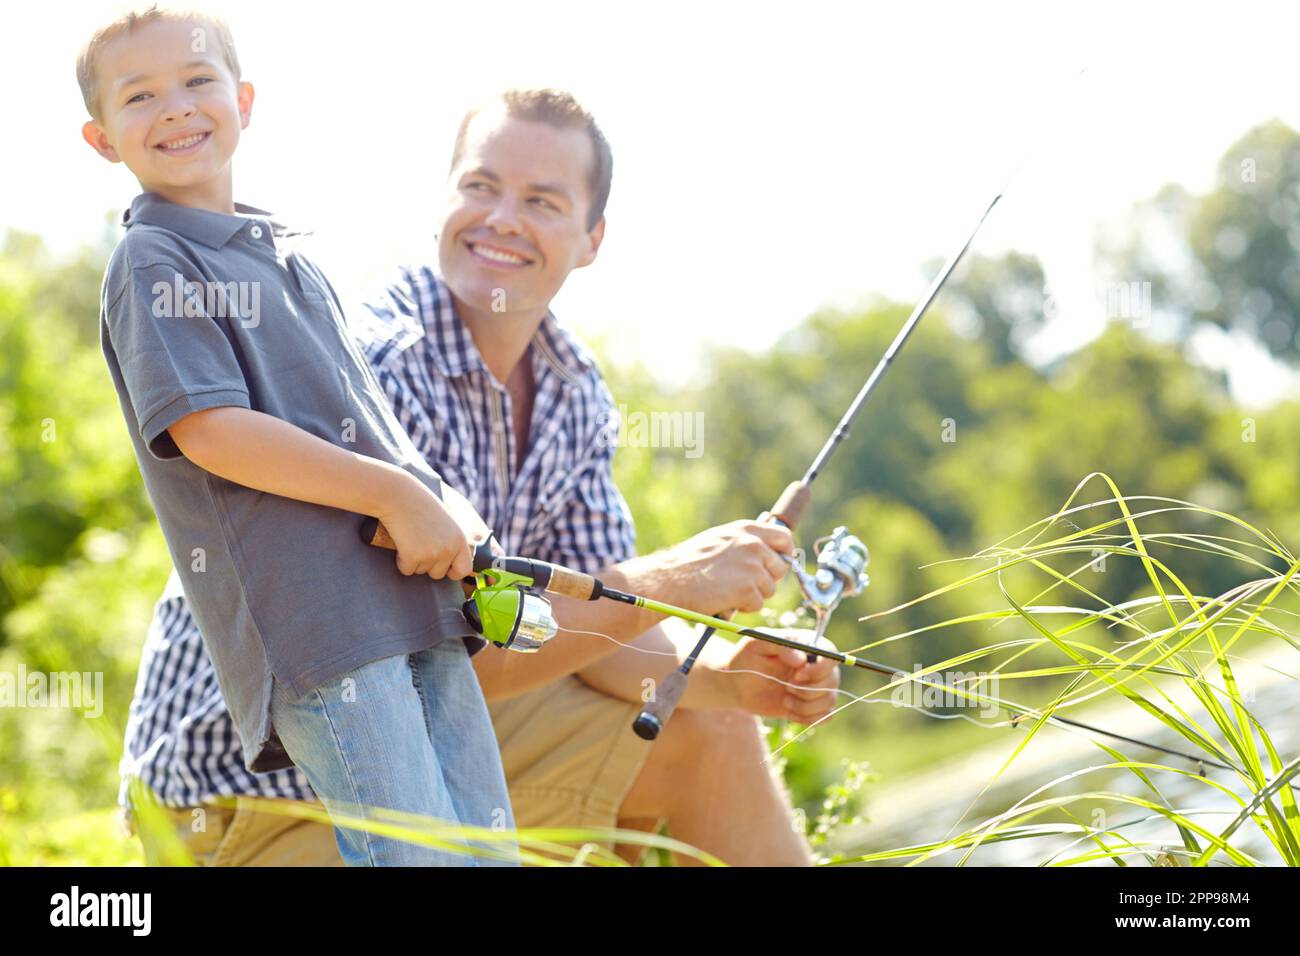 https://c8.alamy.com/comp/2PP98M4/just-like-dad-young-father-smiling-with-his-son-while-holding-their-fishing-rods-beside-a-lake-2PP98M4.jpg